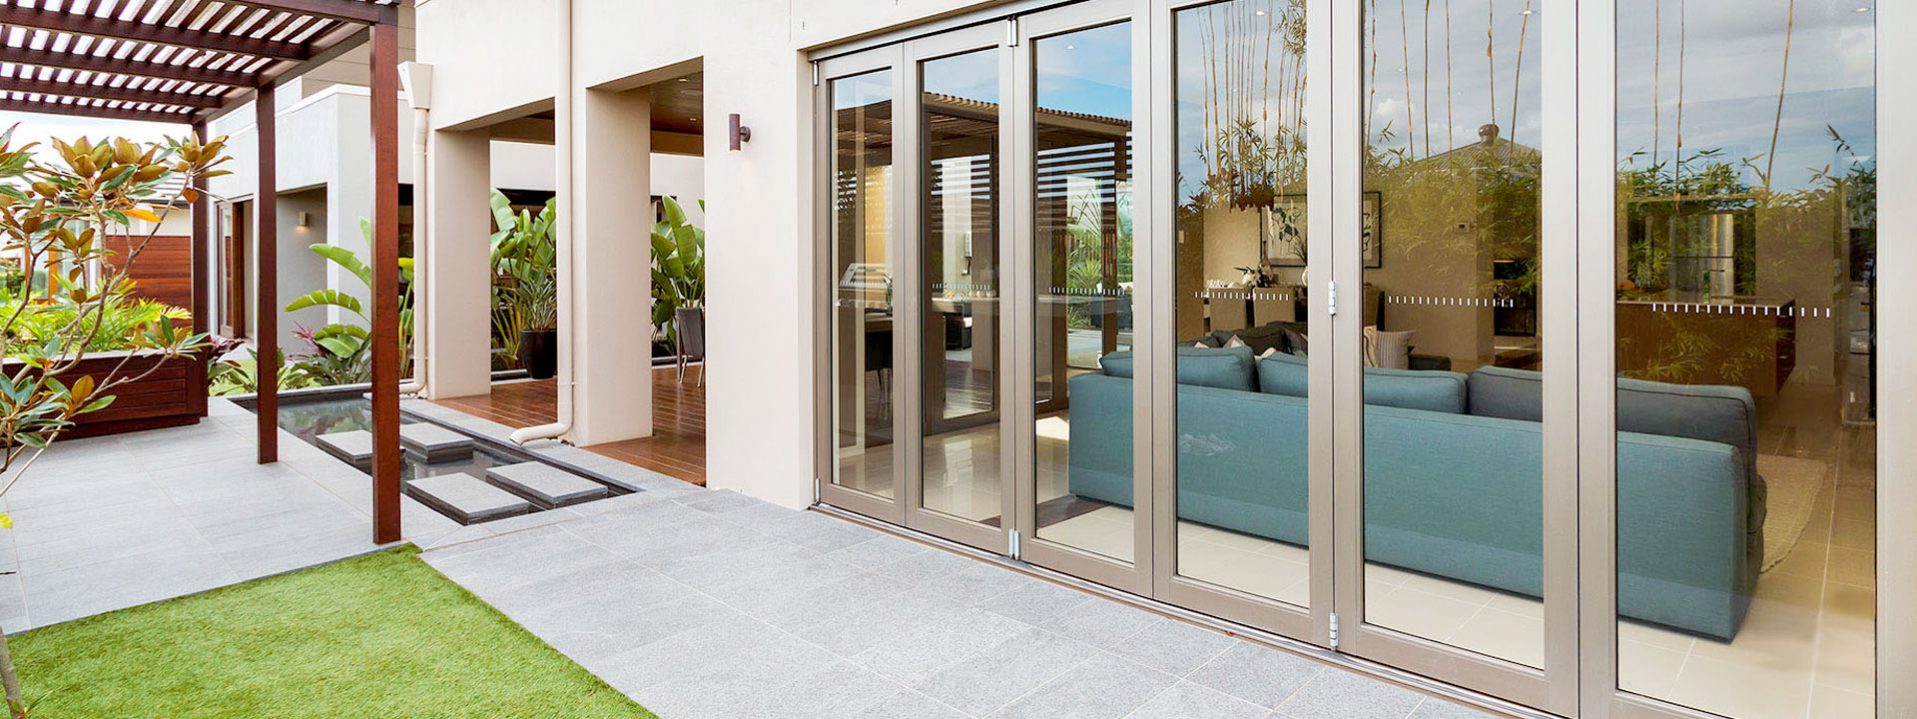 Aluminium bifold security doors located in a Canning Vale backyard.